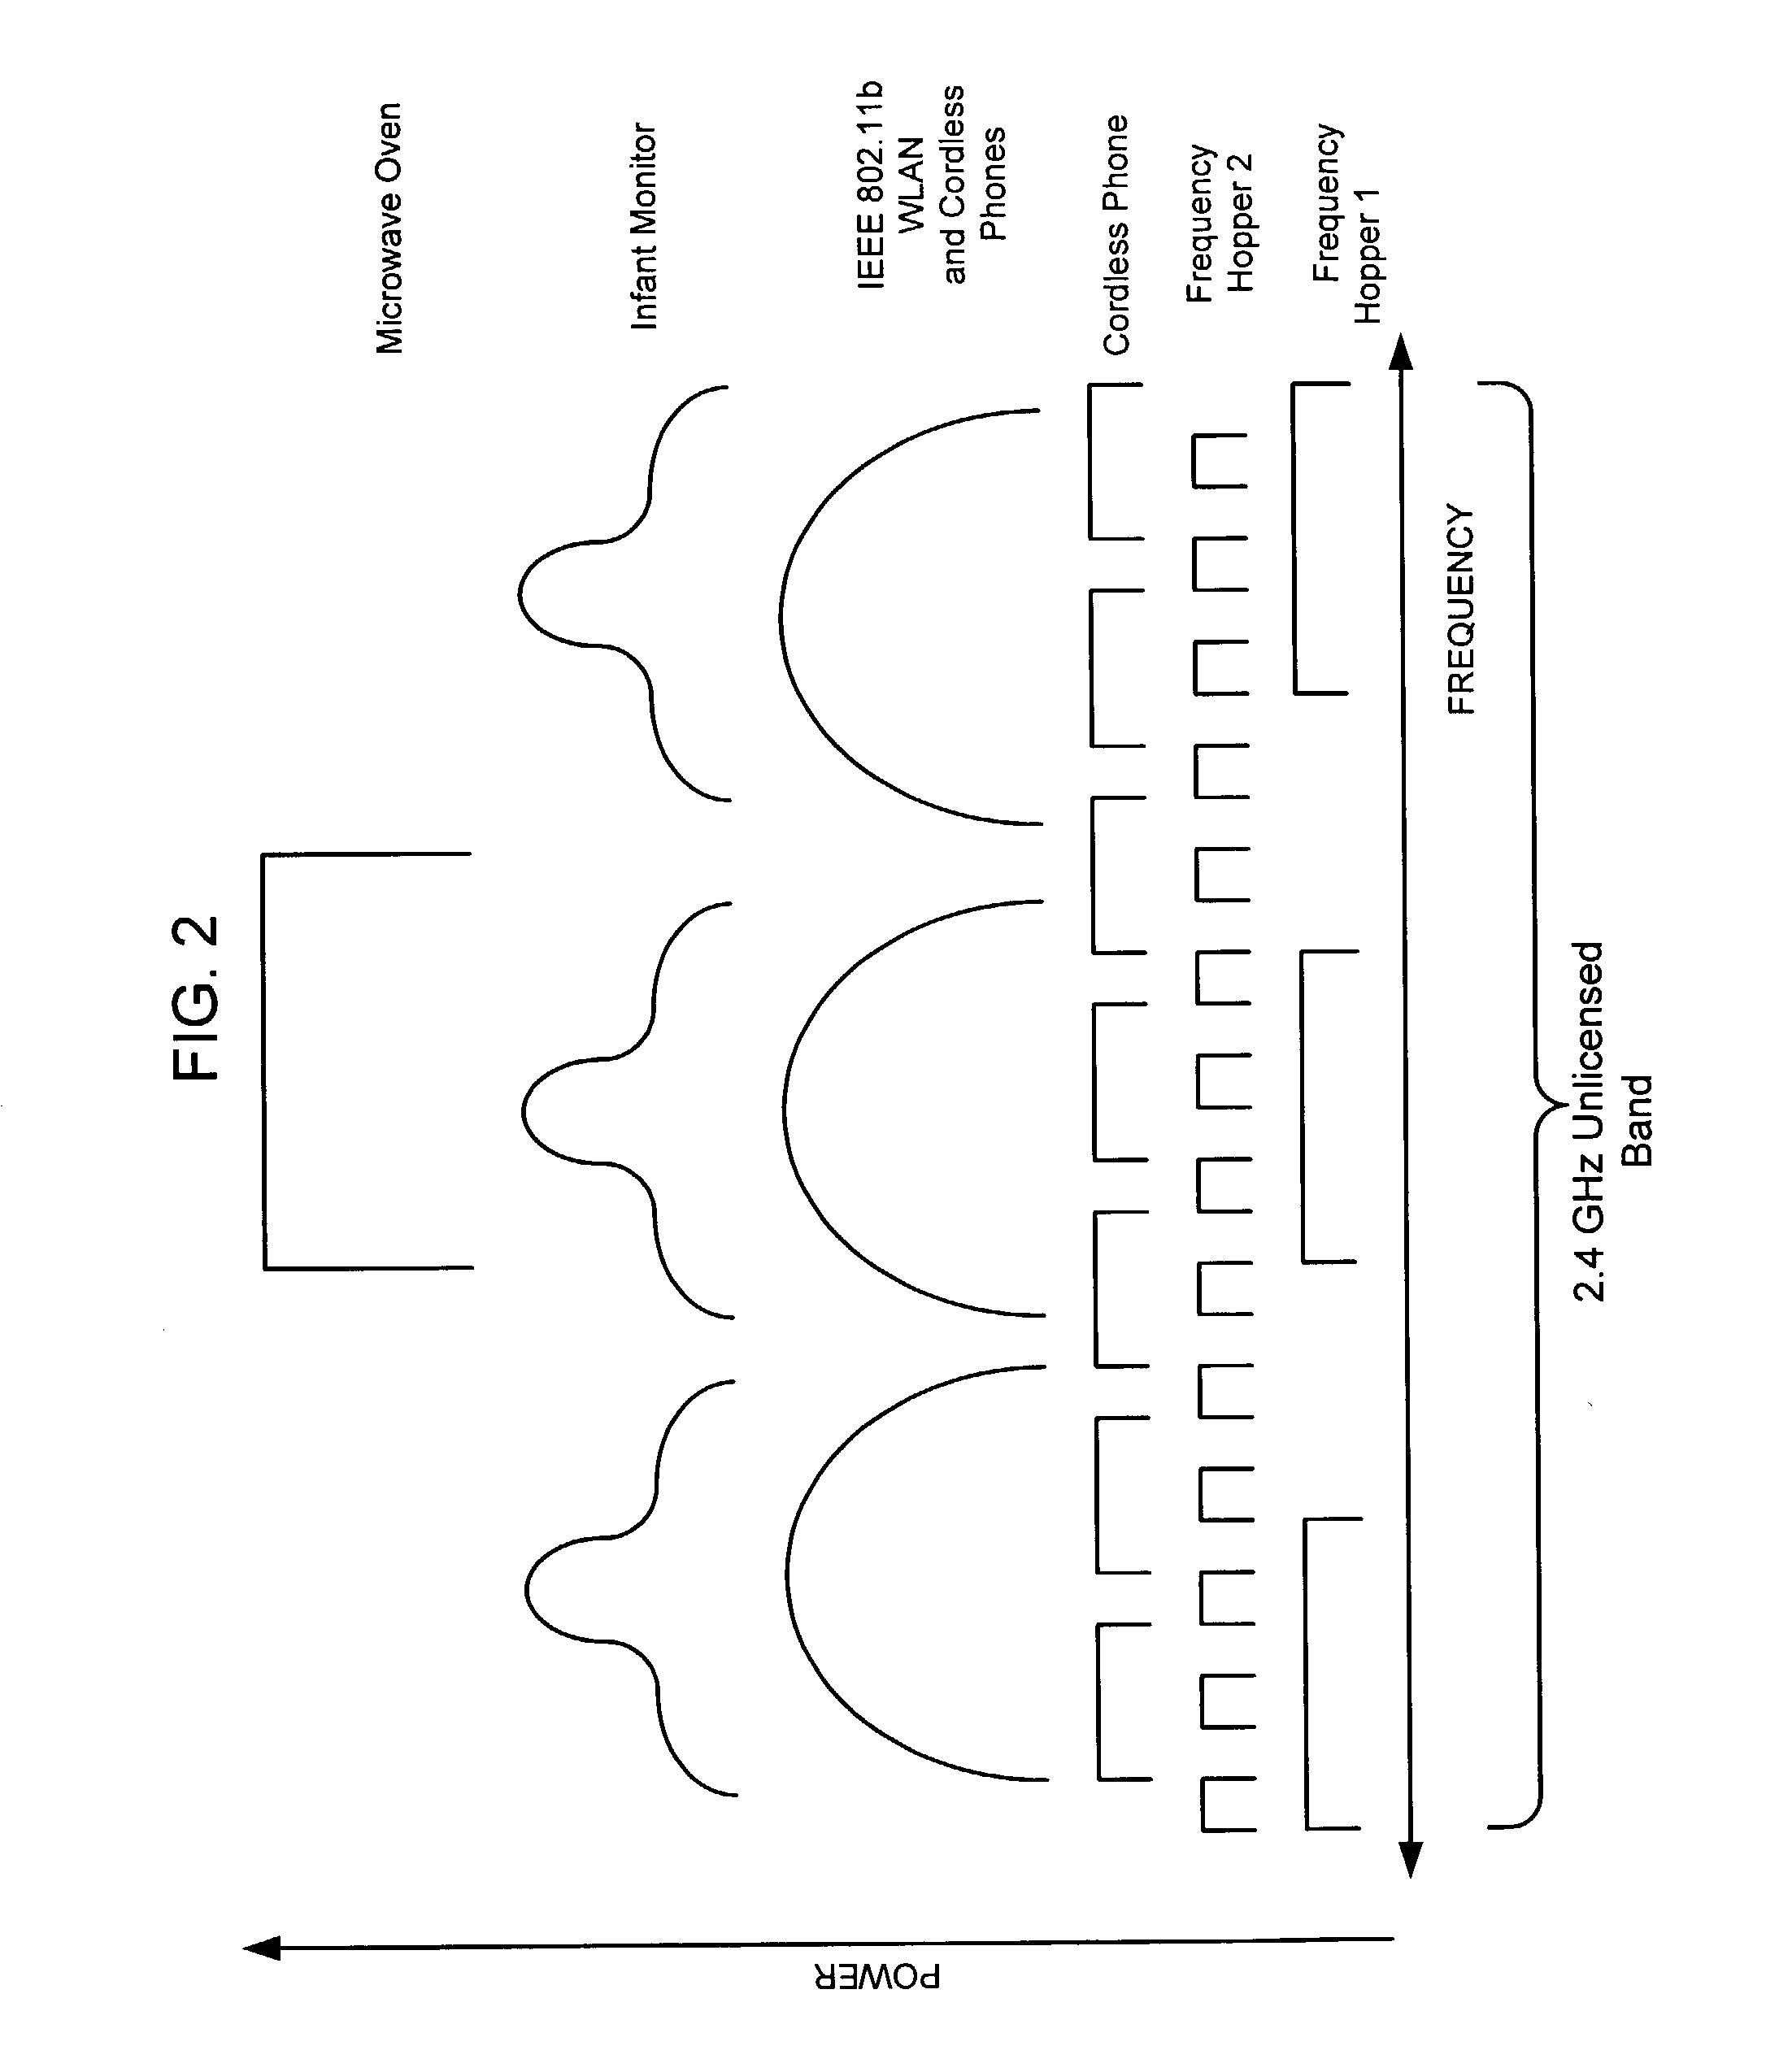 System and method for spectrum management of a shared frequency band